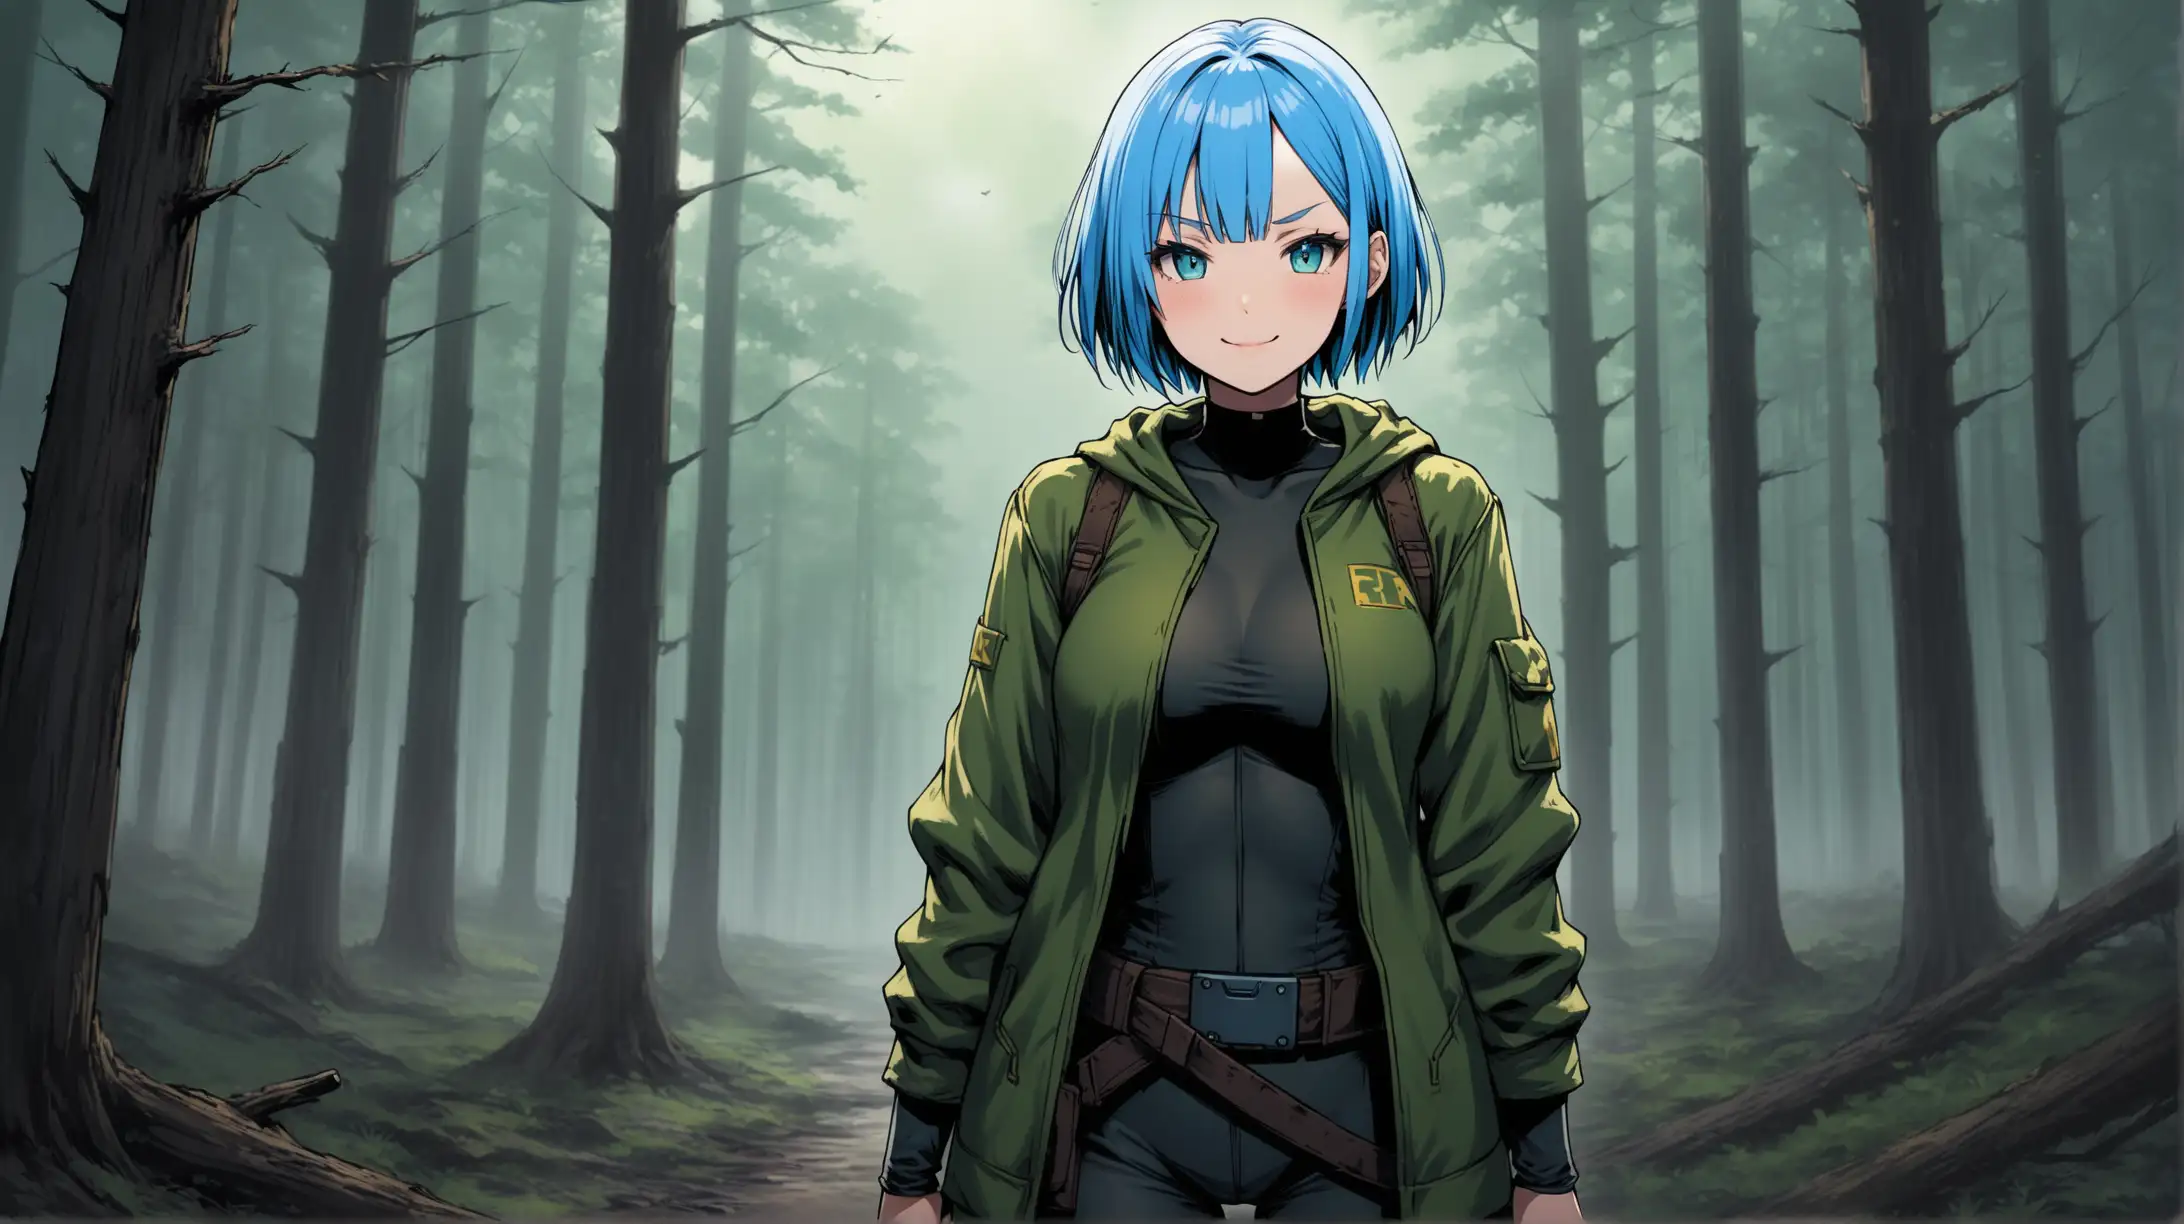 Draw the character Rem, high quality, outdoors, eerie forest, natural lighting, cowboy shot, in a relaxed pose, wearing an outfit inspired by the Fallout series, looking at the viewer with a loving smile